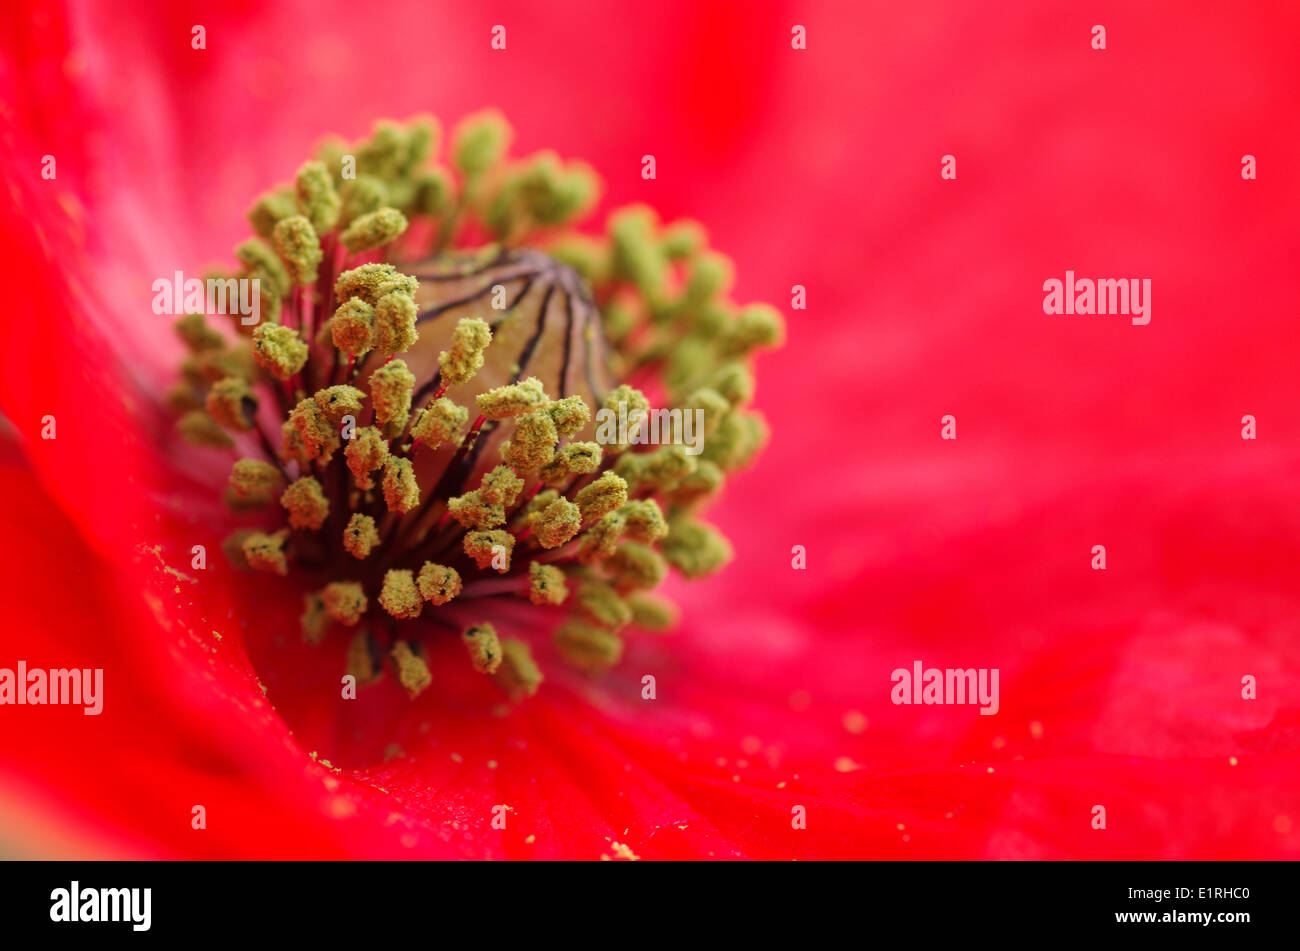 Detail of pollen on the stamen of the Corn poppy Stock Photo